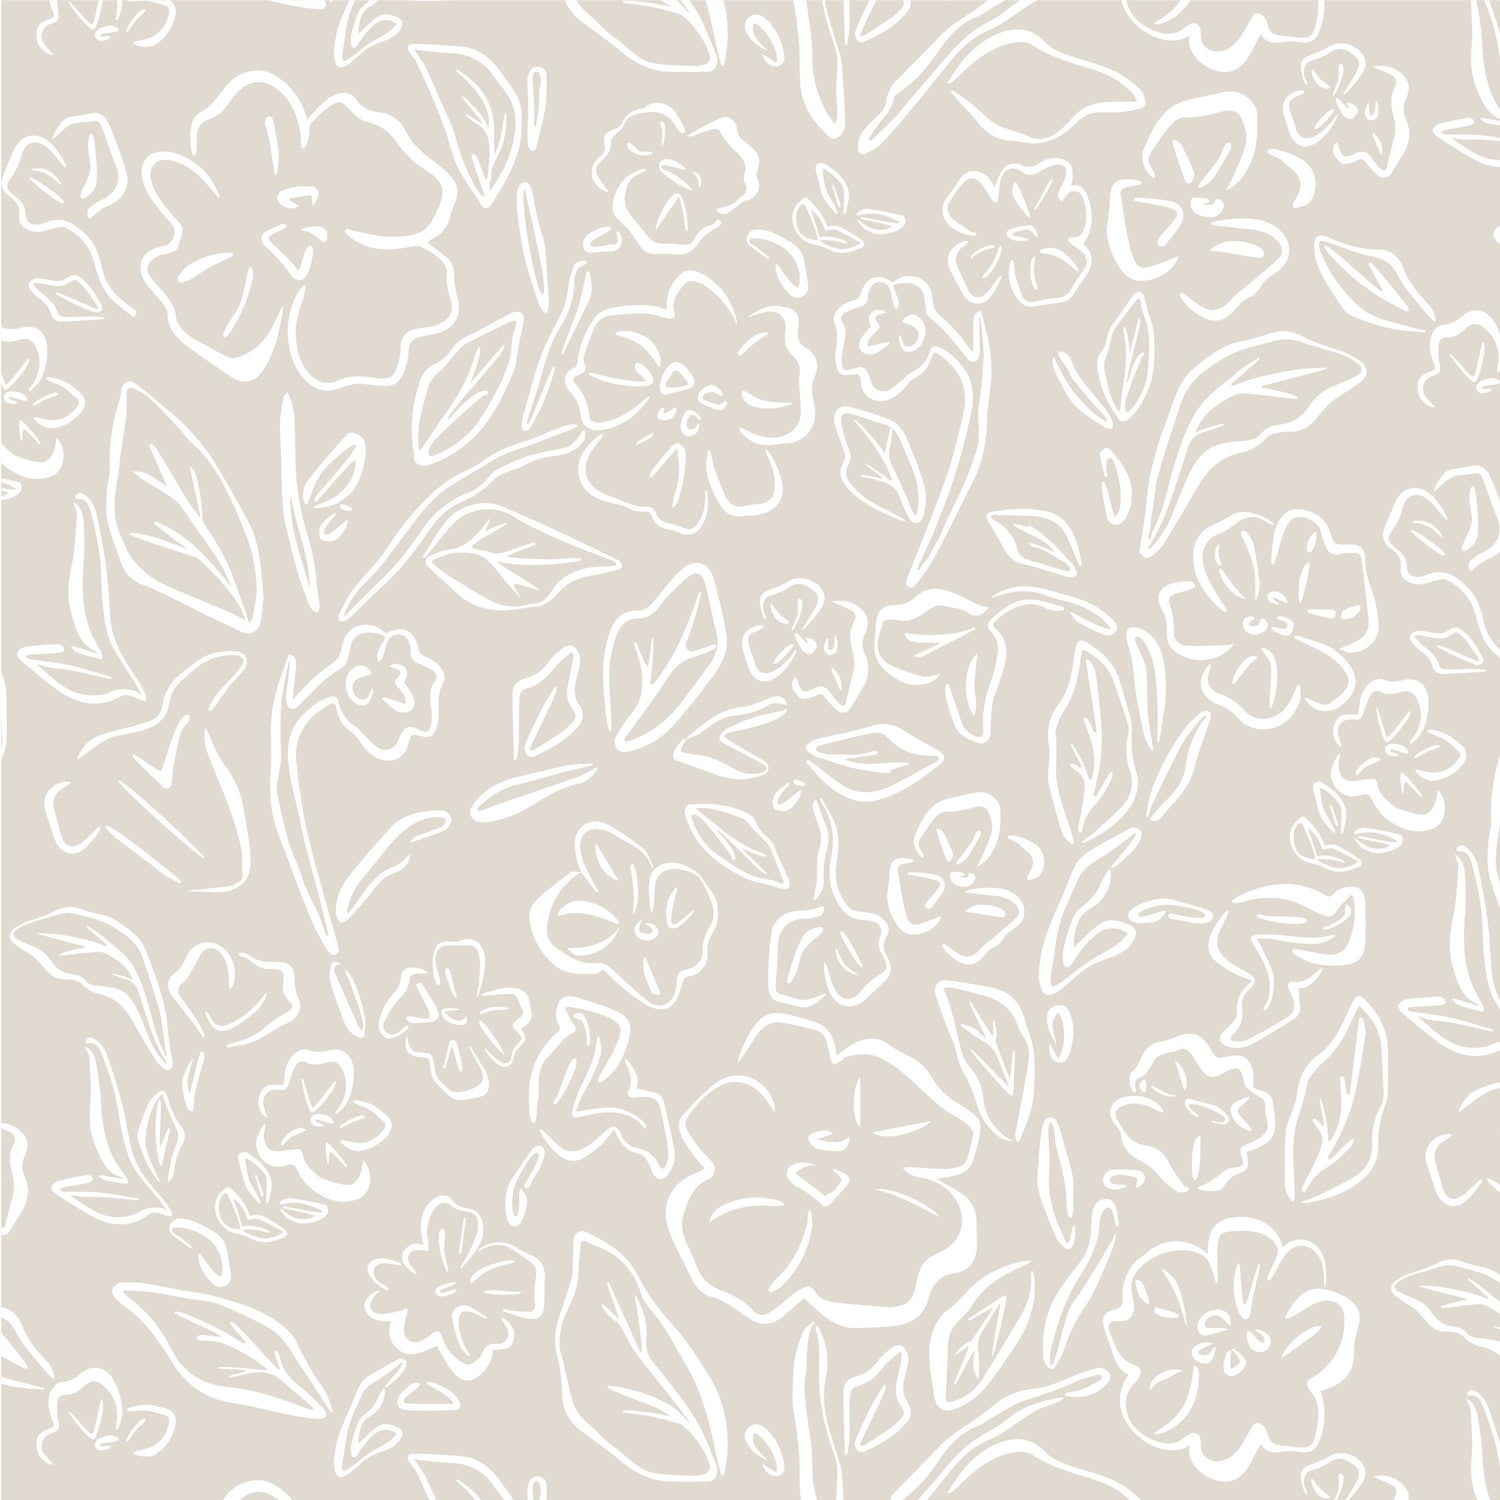 This Beverly Wallpaper in white on taupe offers a stylish and feminine touch with its delicate floral design shown zoomed in.